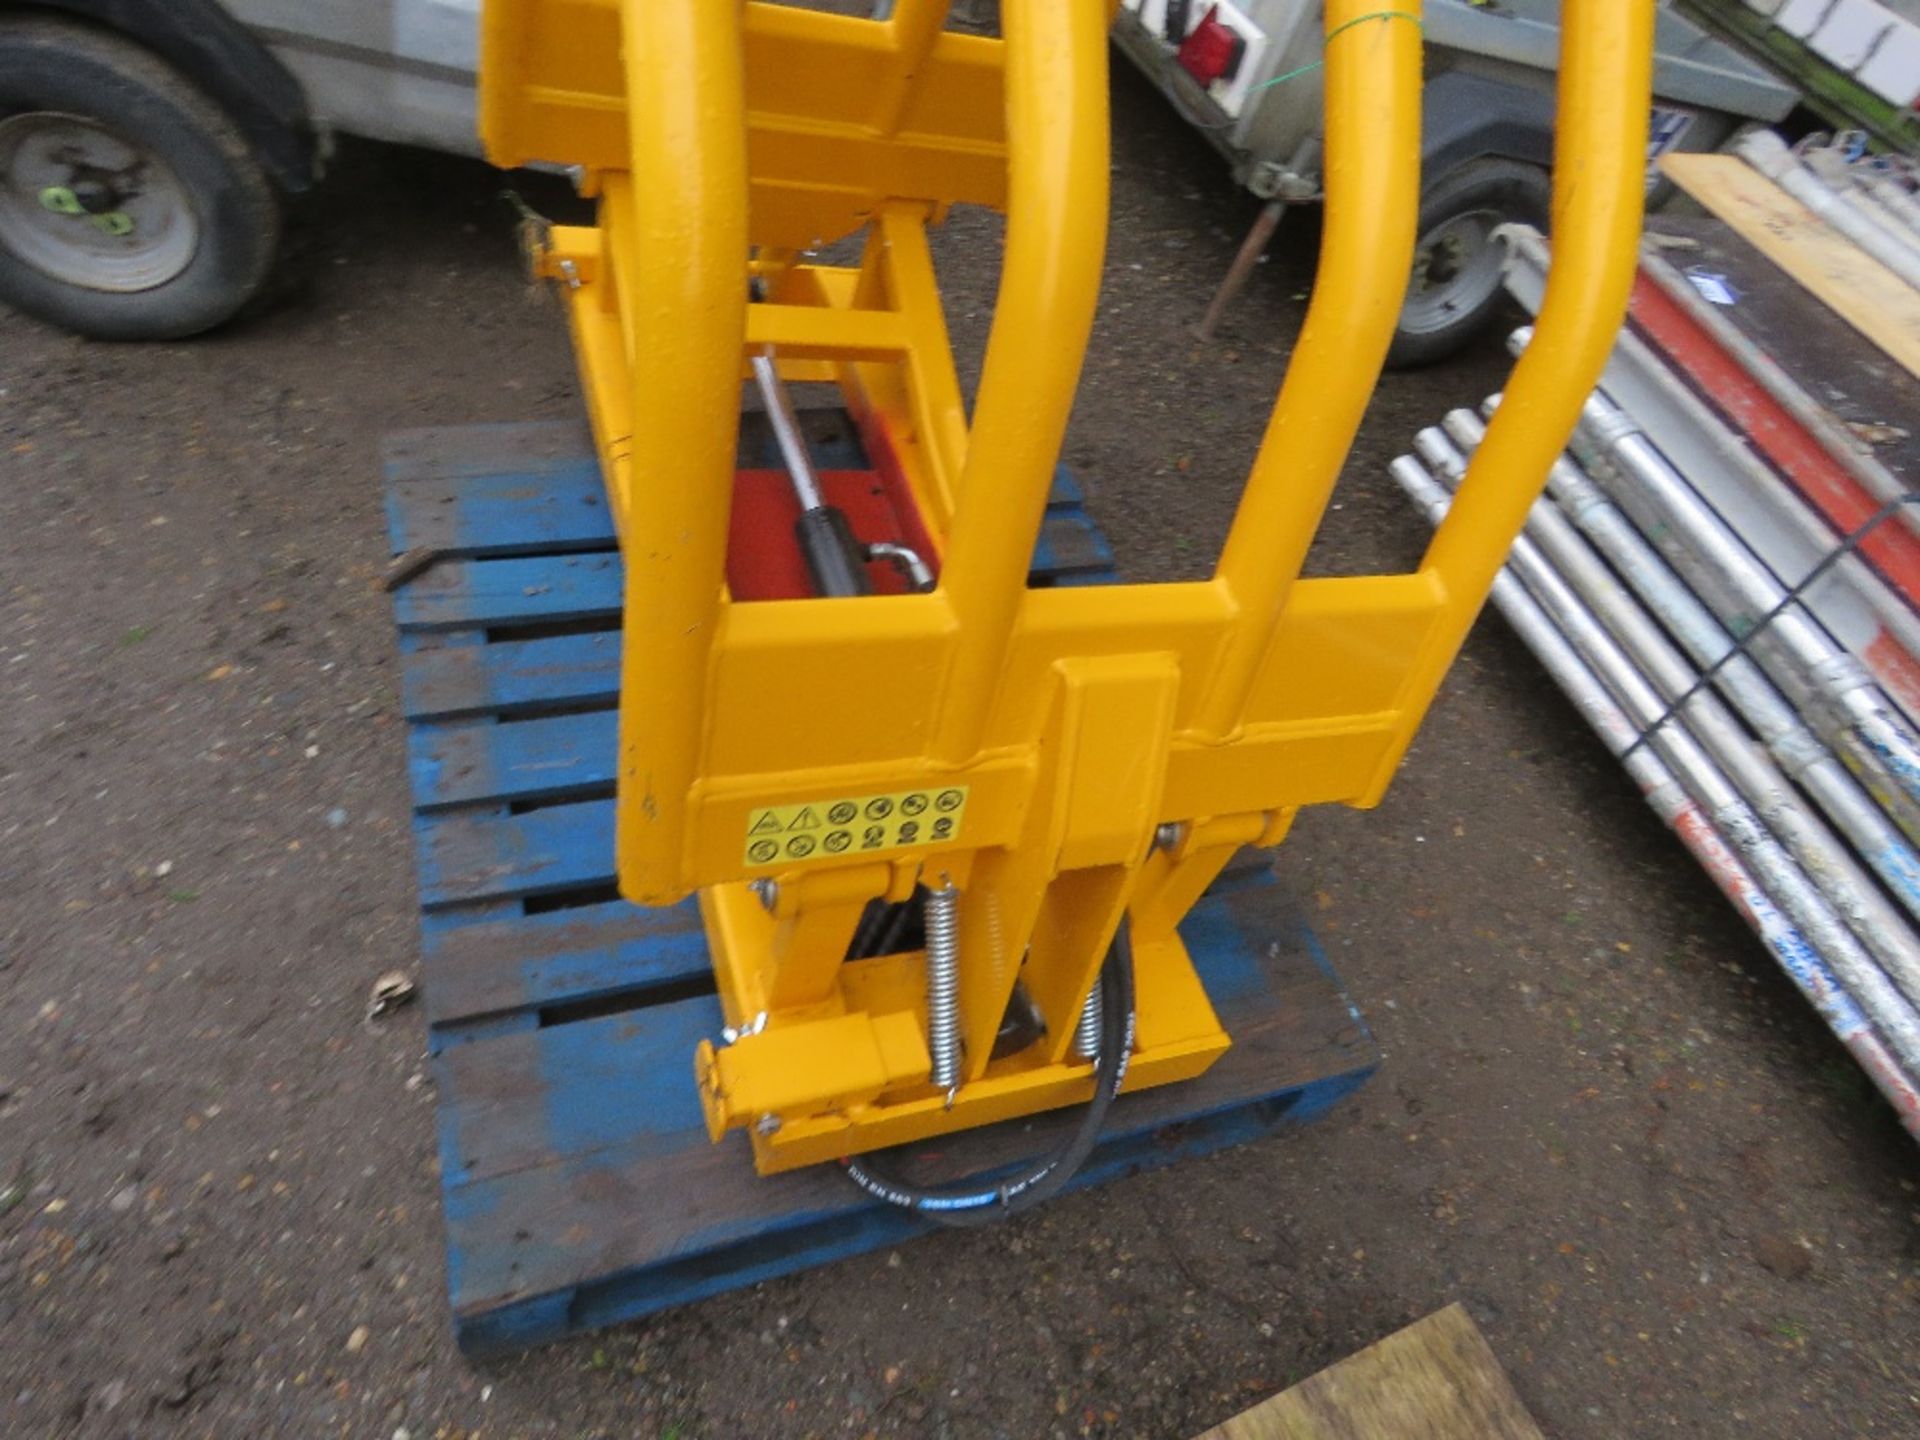 WRAPPED SILAGE BALE SQUEEZE ATTACHMENT FOR LOADER, APPEARS UNUSED.....THIS LOT IS SOLD UNDER THE AUC - Image 2 of 5